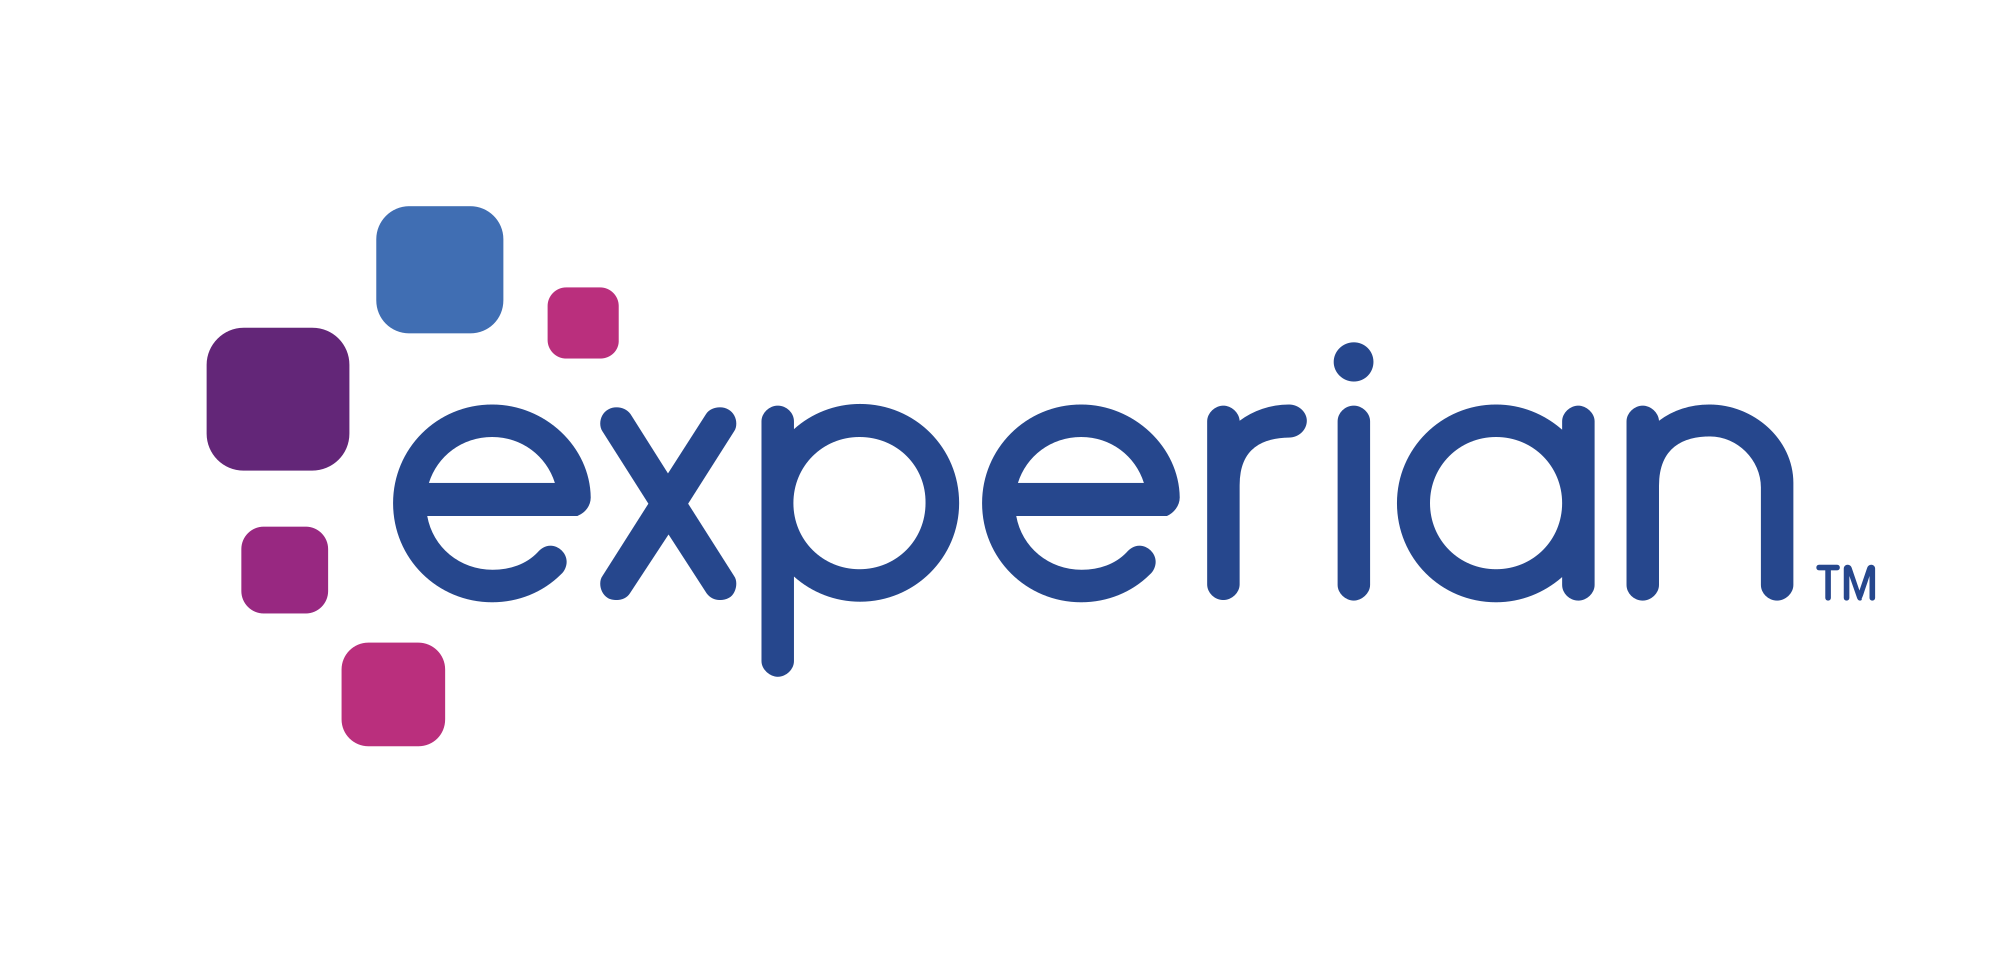 Experian Appoints Mohan Jayaraman to Lead APAC Expansion for DA, BI